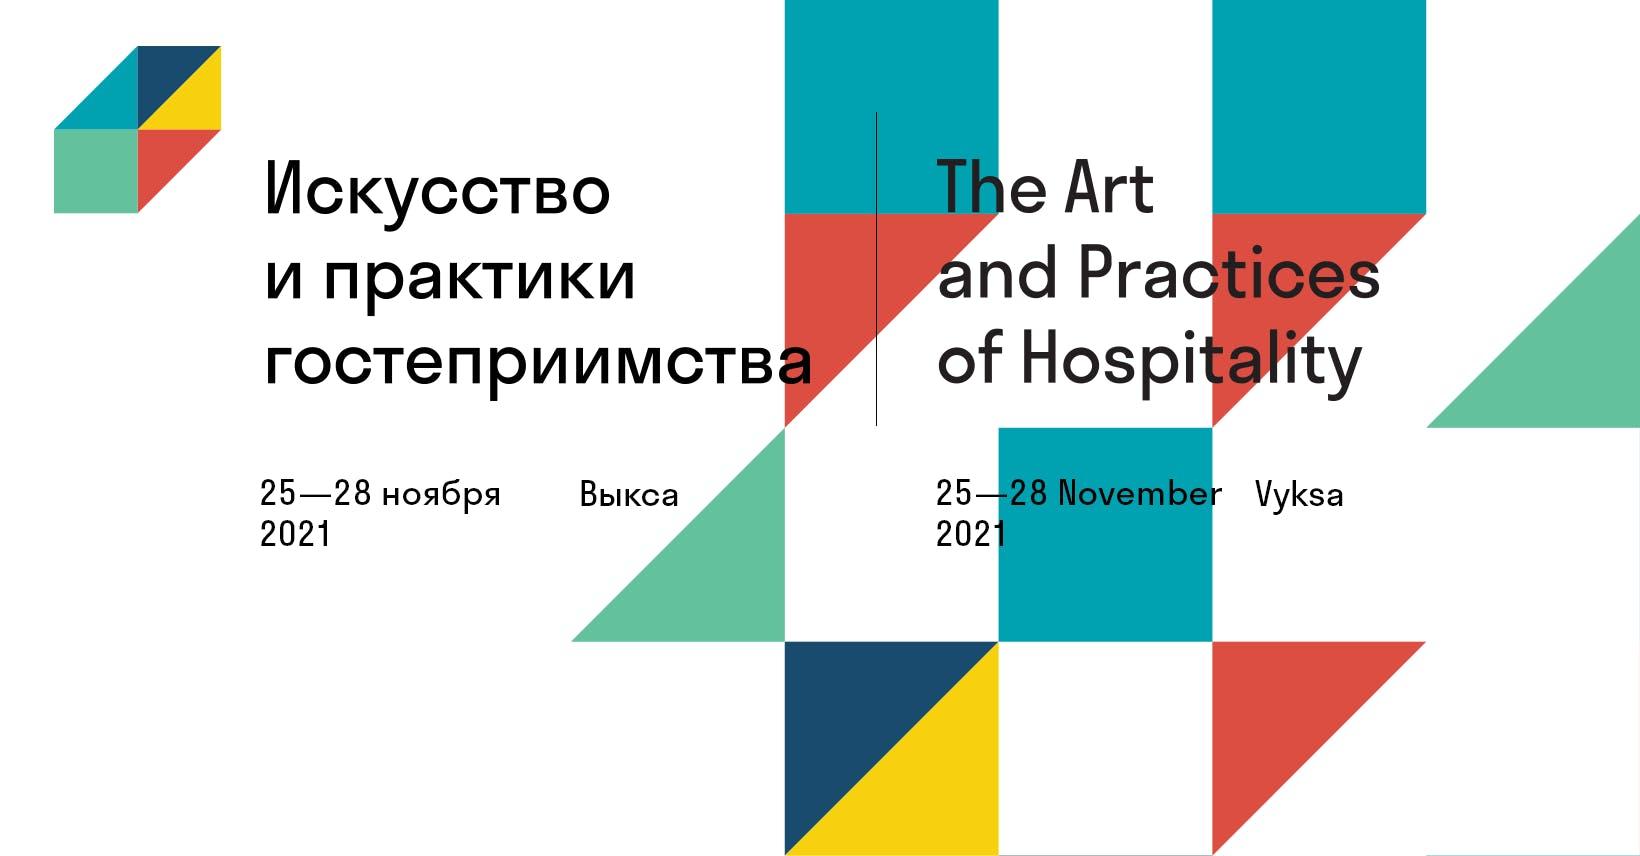 International conference “The Art and Practices of Hospitality”, Picture: https://conference.vyksaair.com/